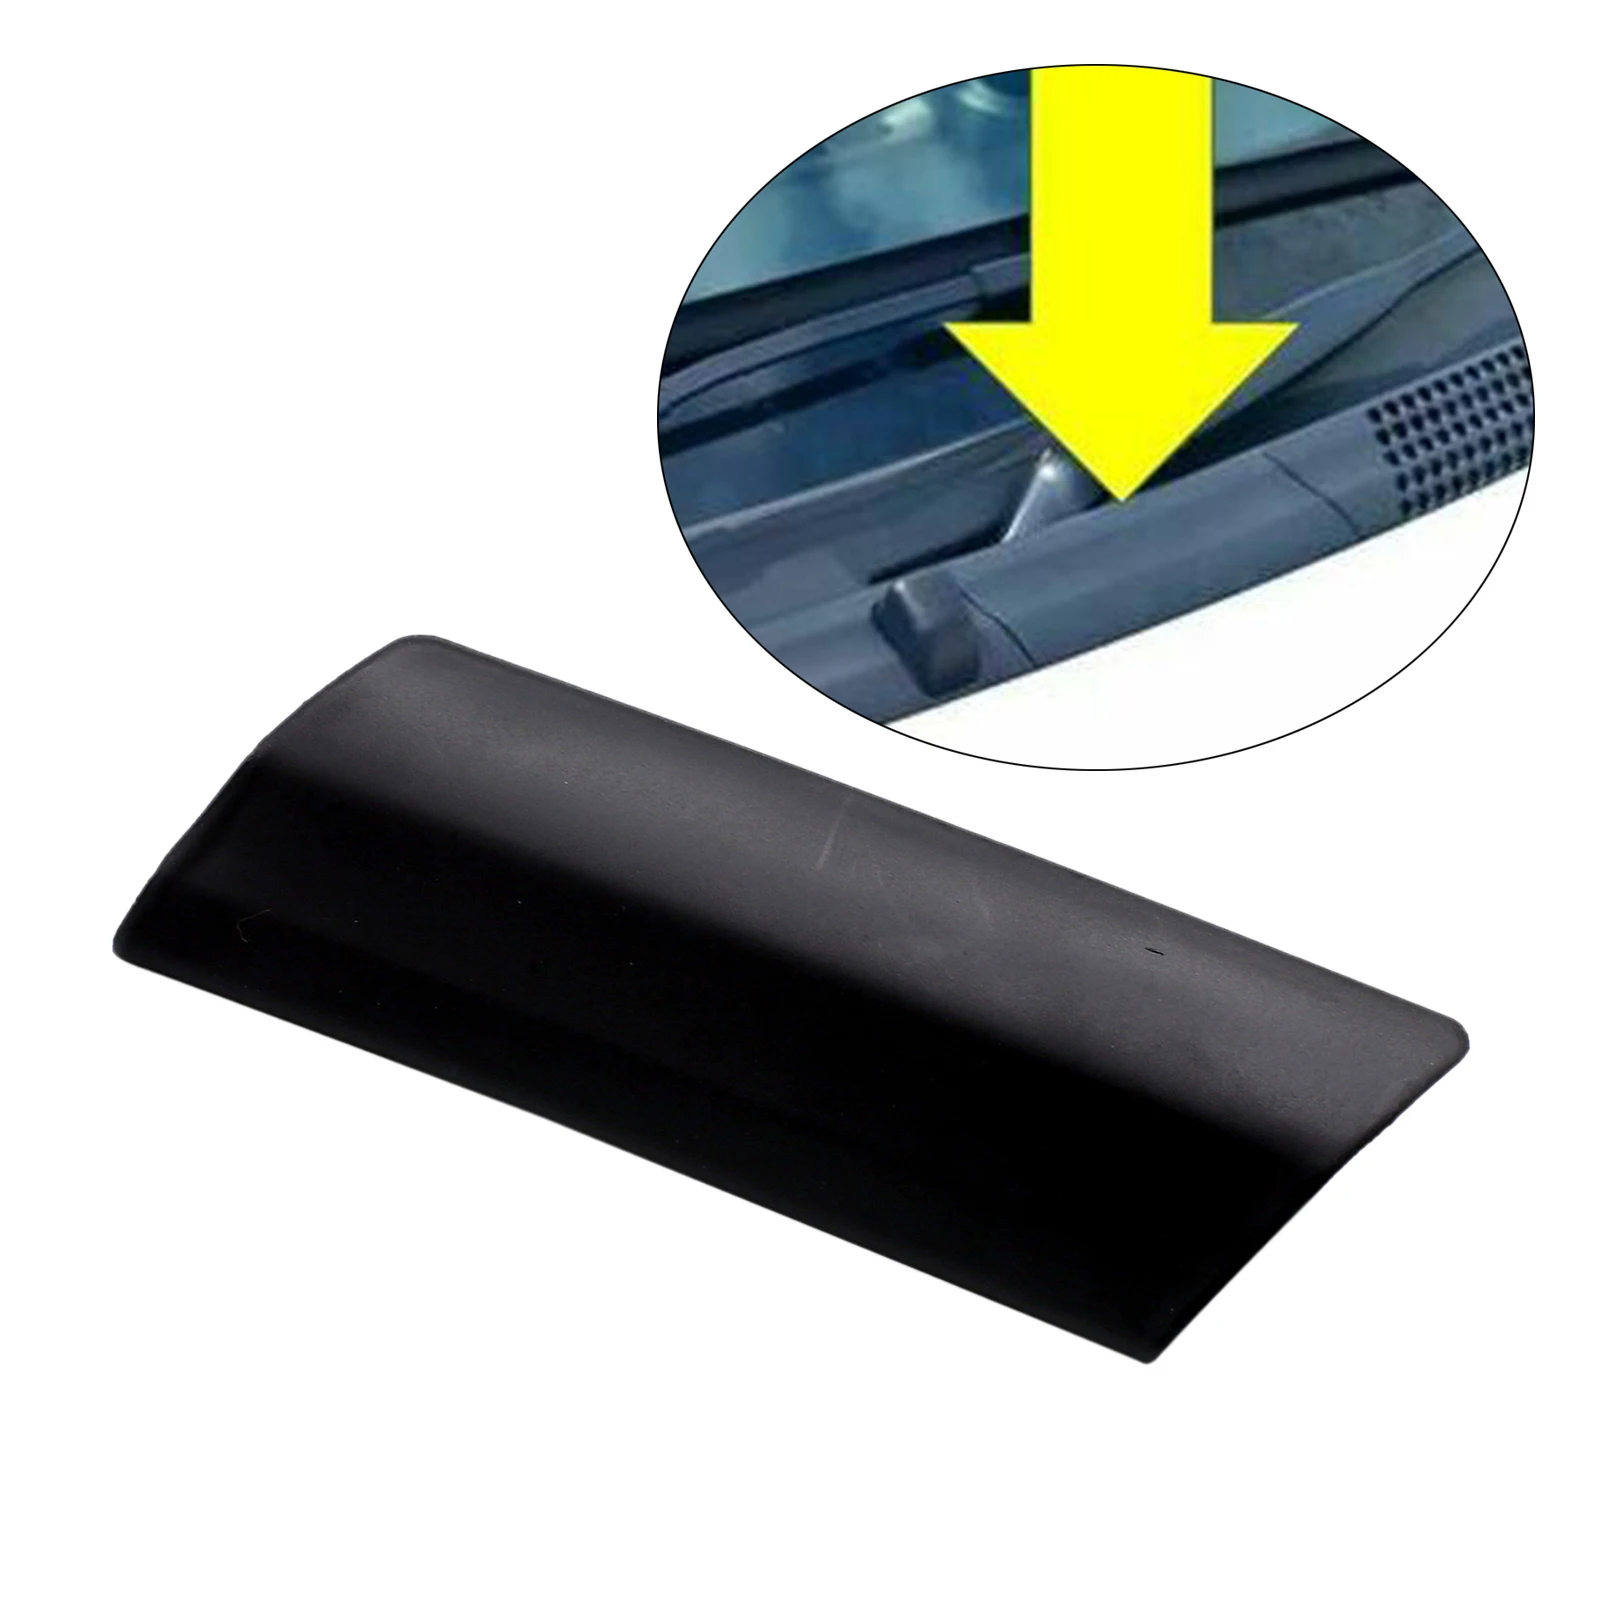 Auto Wiper Scuttle Panel Trim Protective Cover Left 735452714 for Fiat 500 ,Easy Install